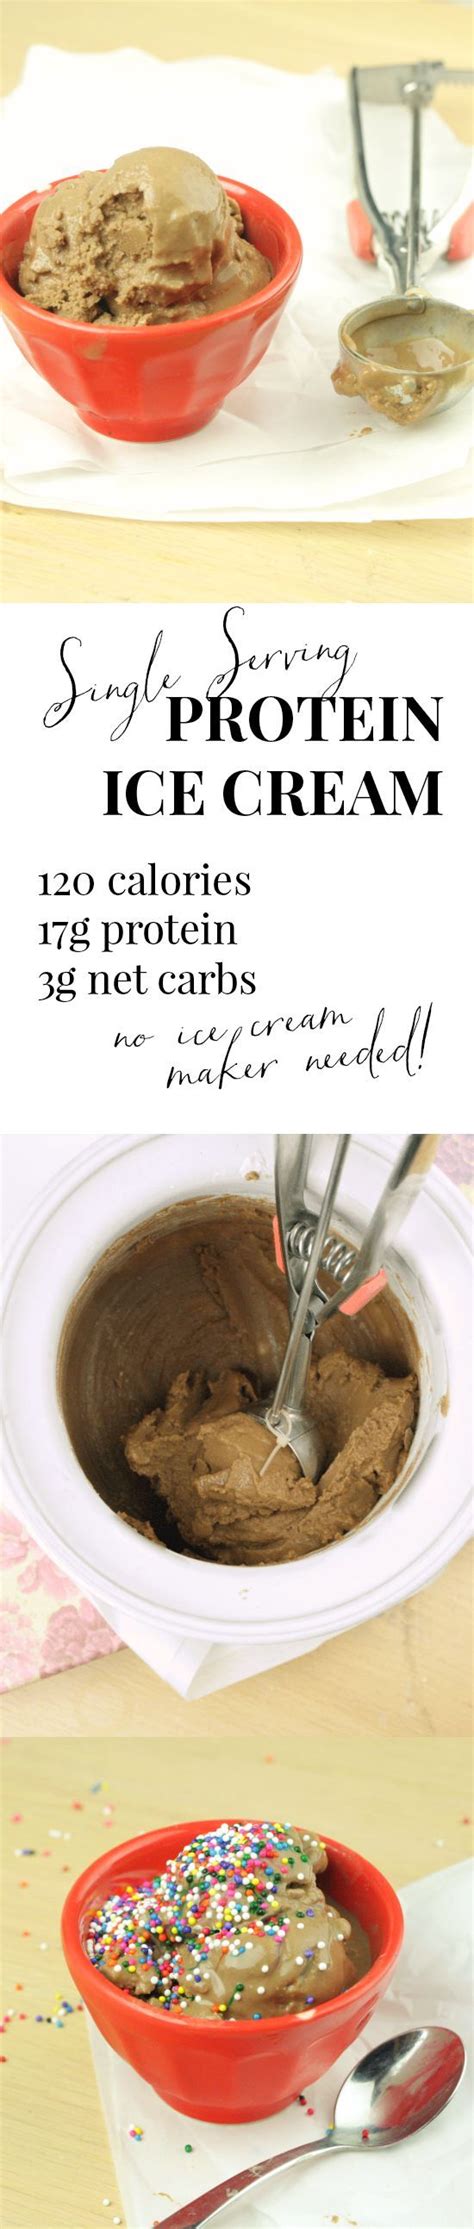 She shares simple recipes and guides for keto and low carb diets. Protein Ice Cream | Recipe | Protein ice cream, Low carb ice cream, Low carb ice cream recipe